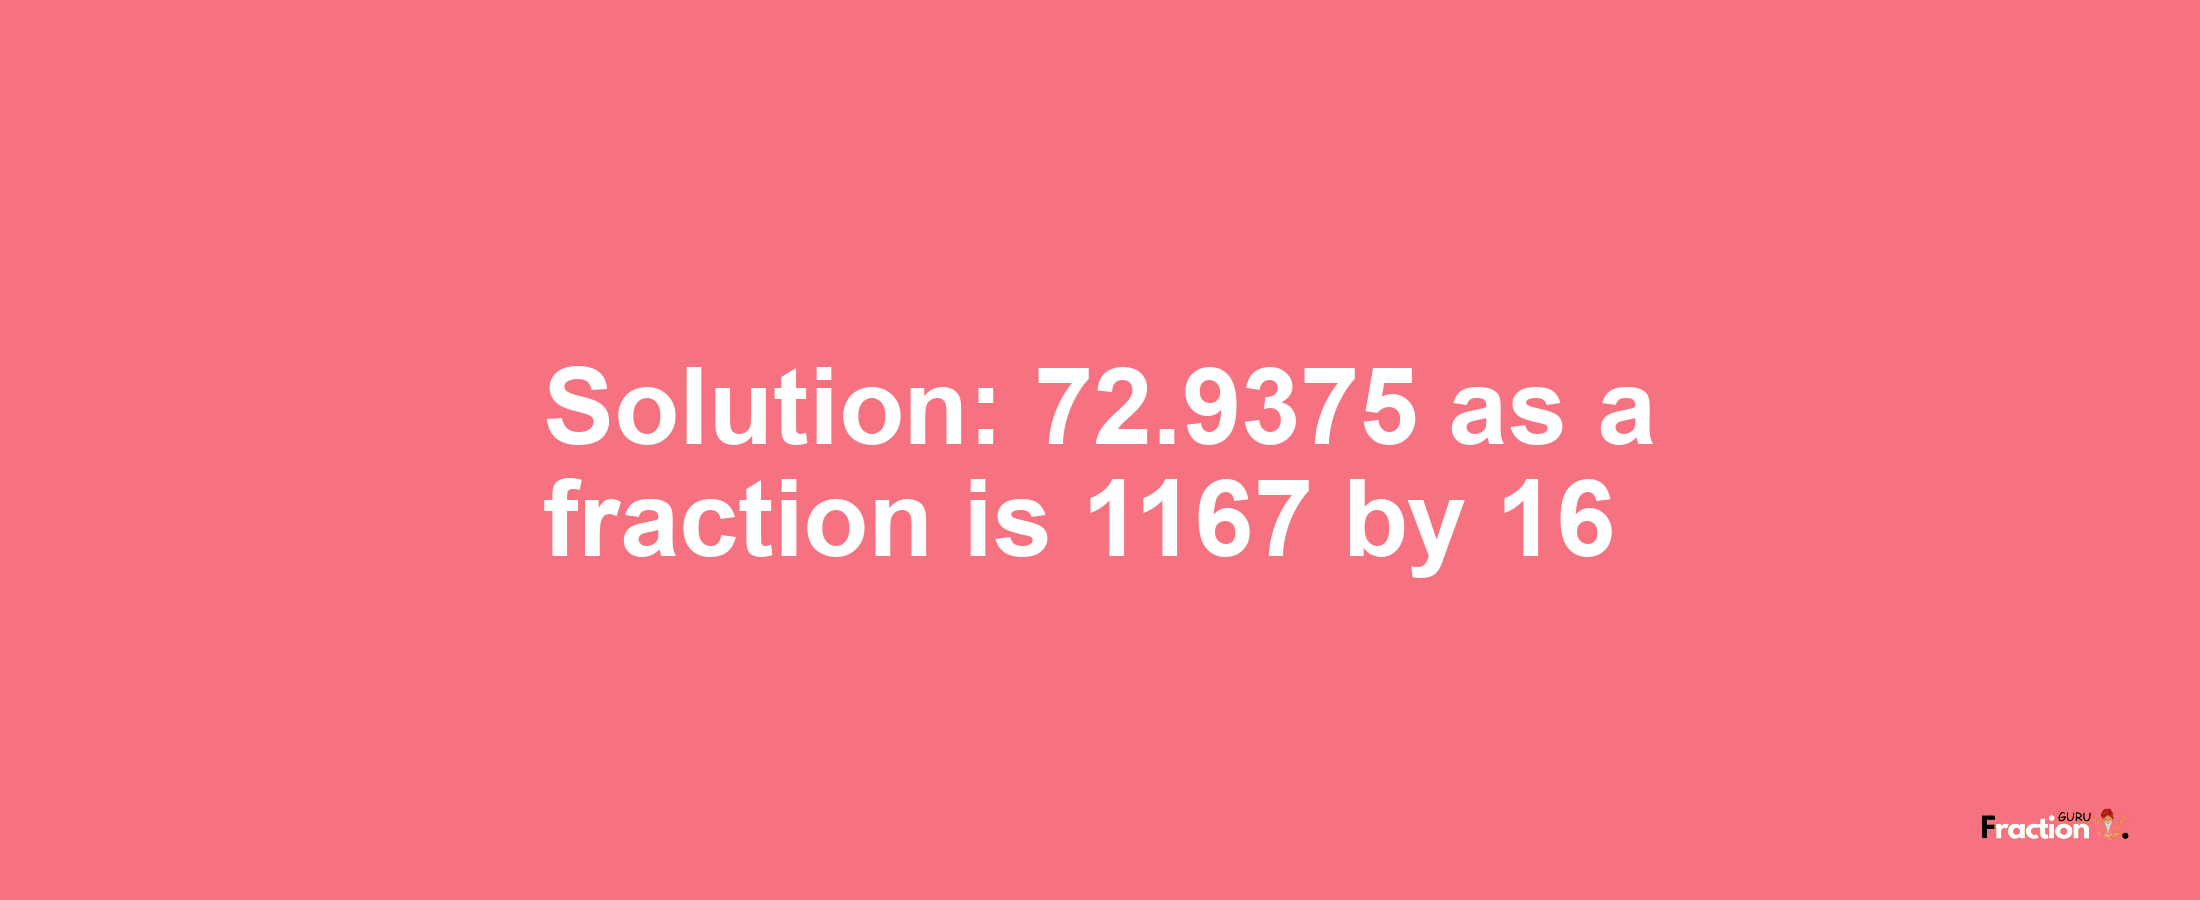 Solution:72.9375 as a fraction is 1167/16